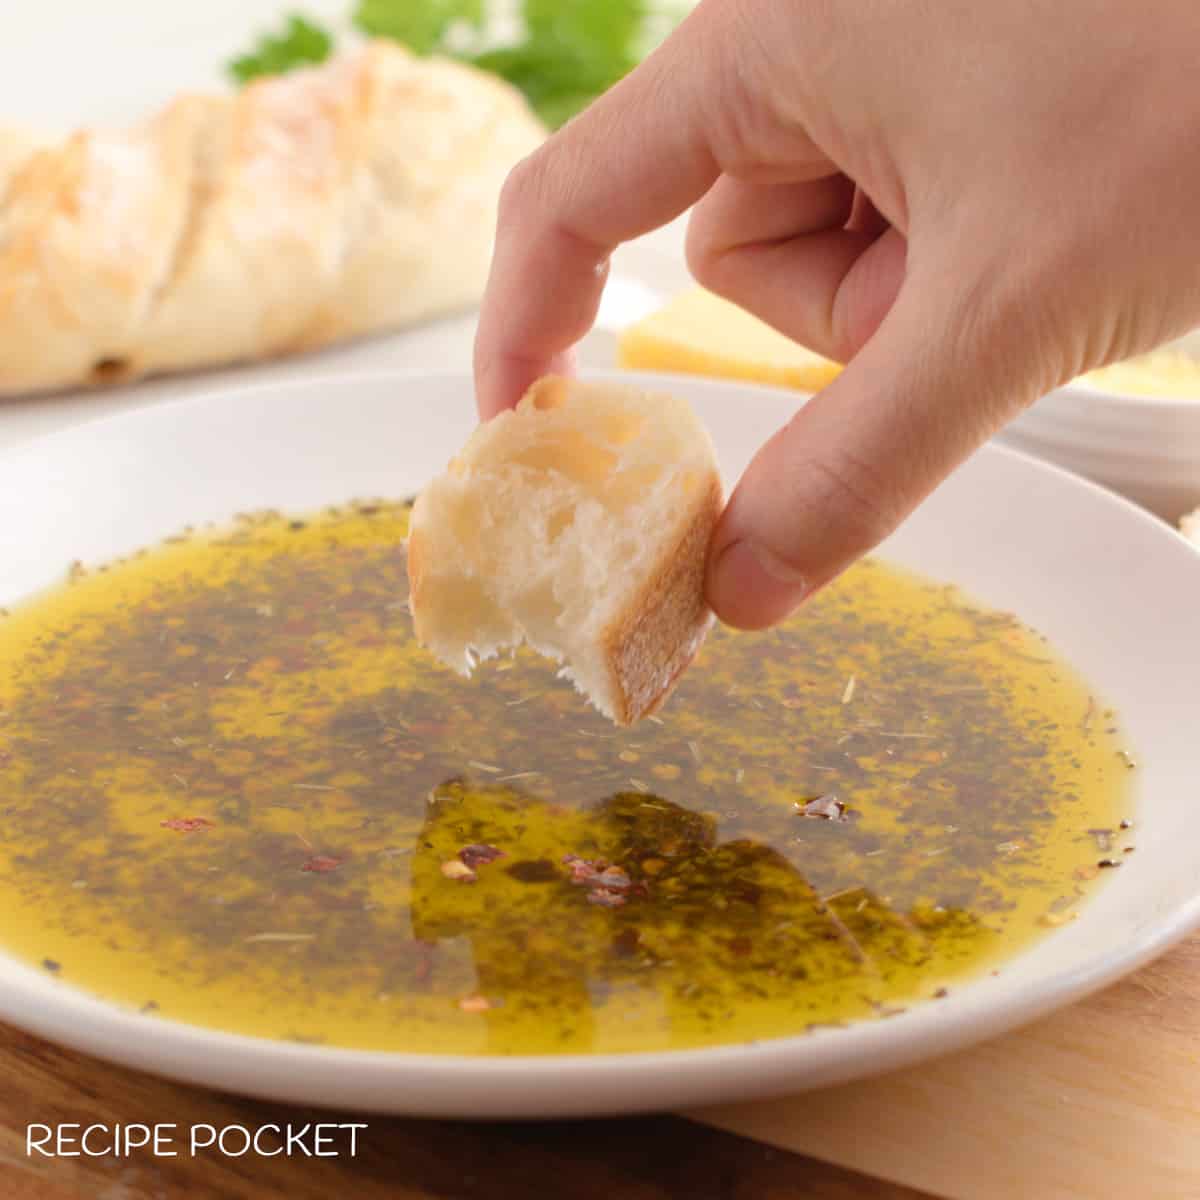 A piece of bread being dipped into flavoured dipping oil.